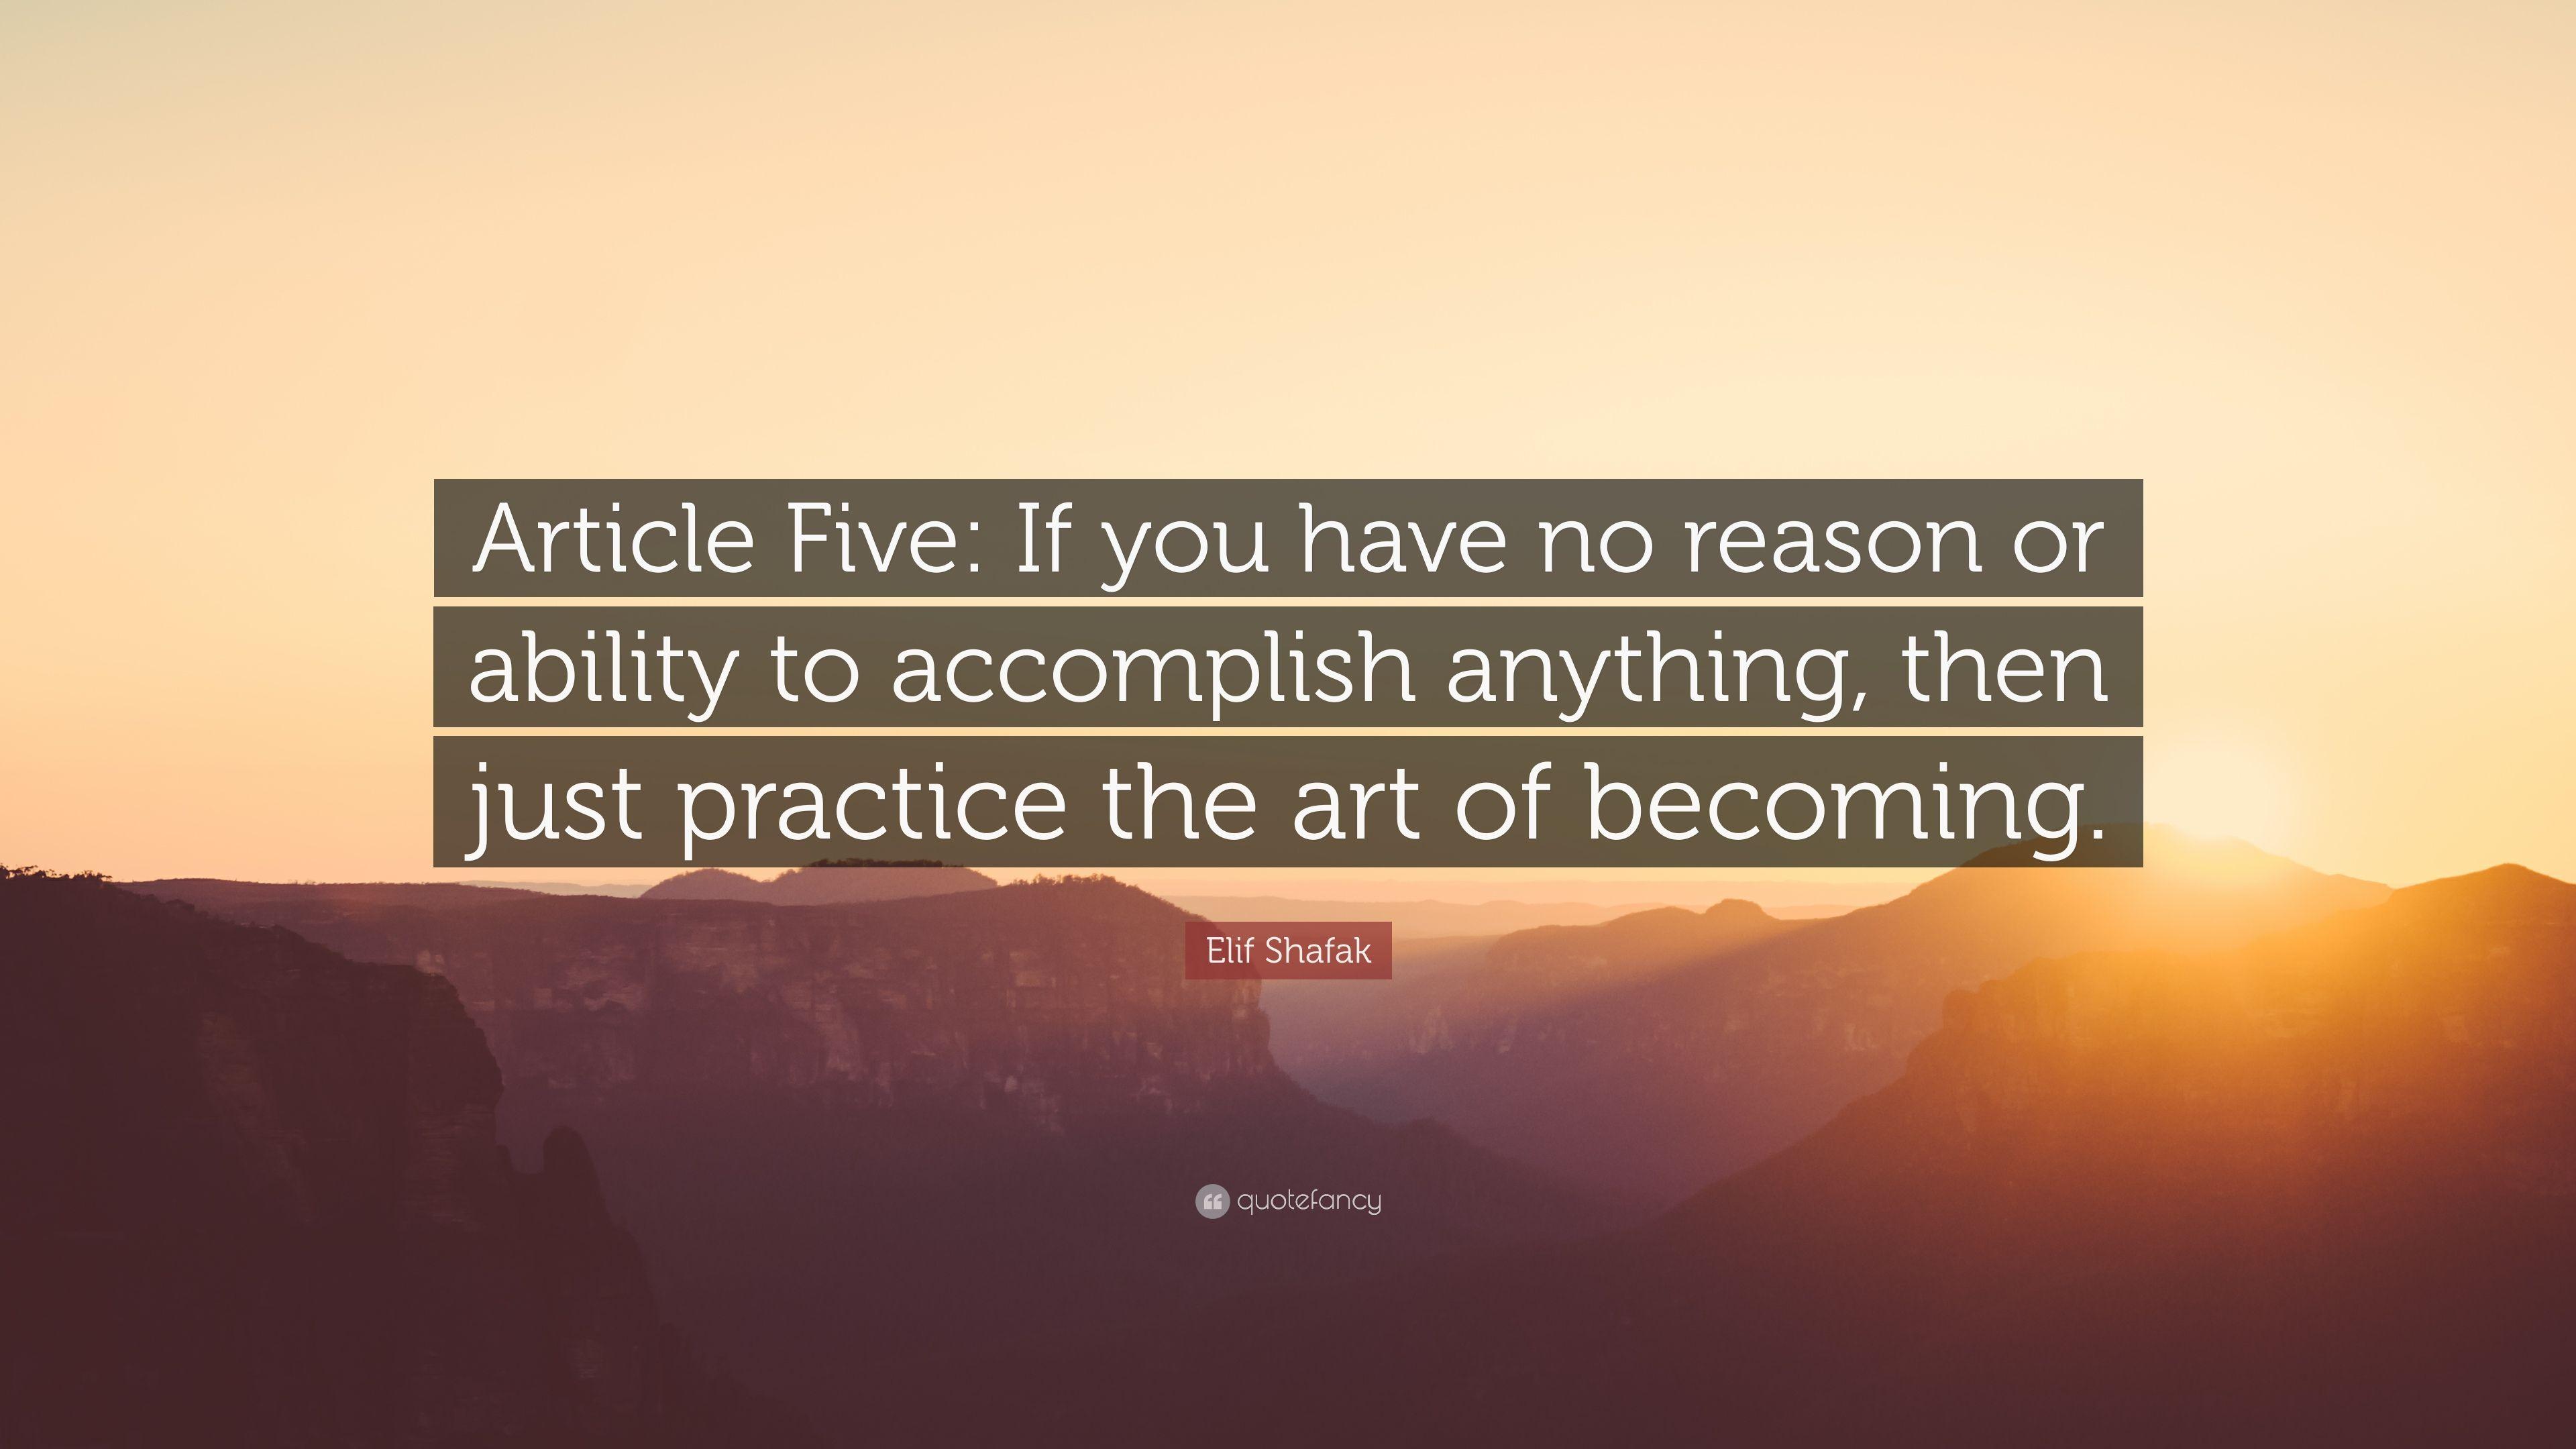 Elif Shafak Quote: “Article Five: If you have no reason or ability